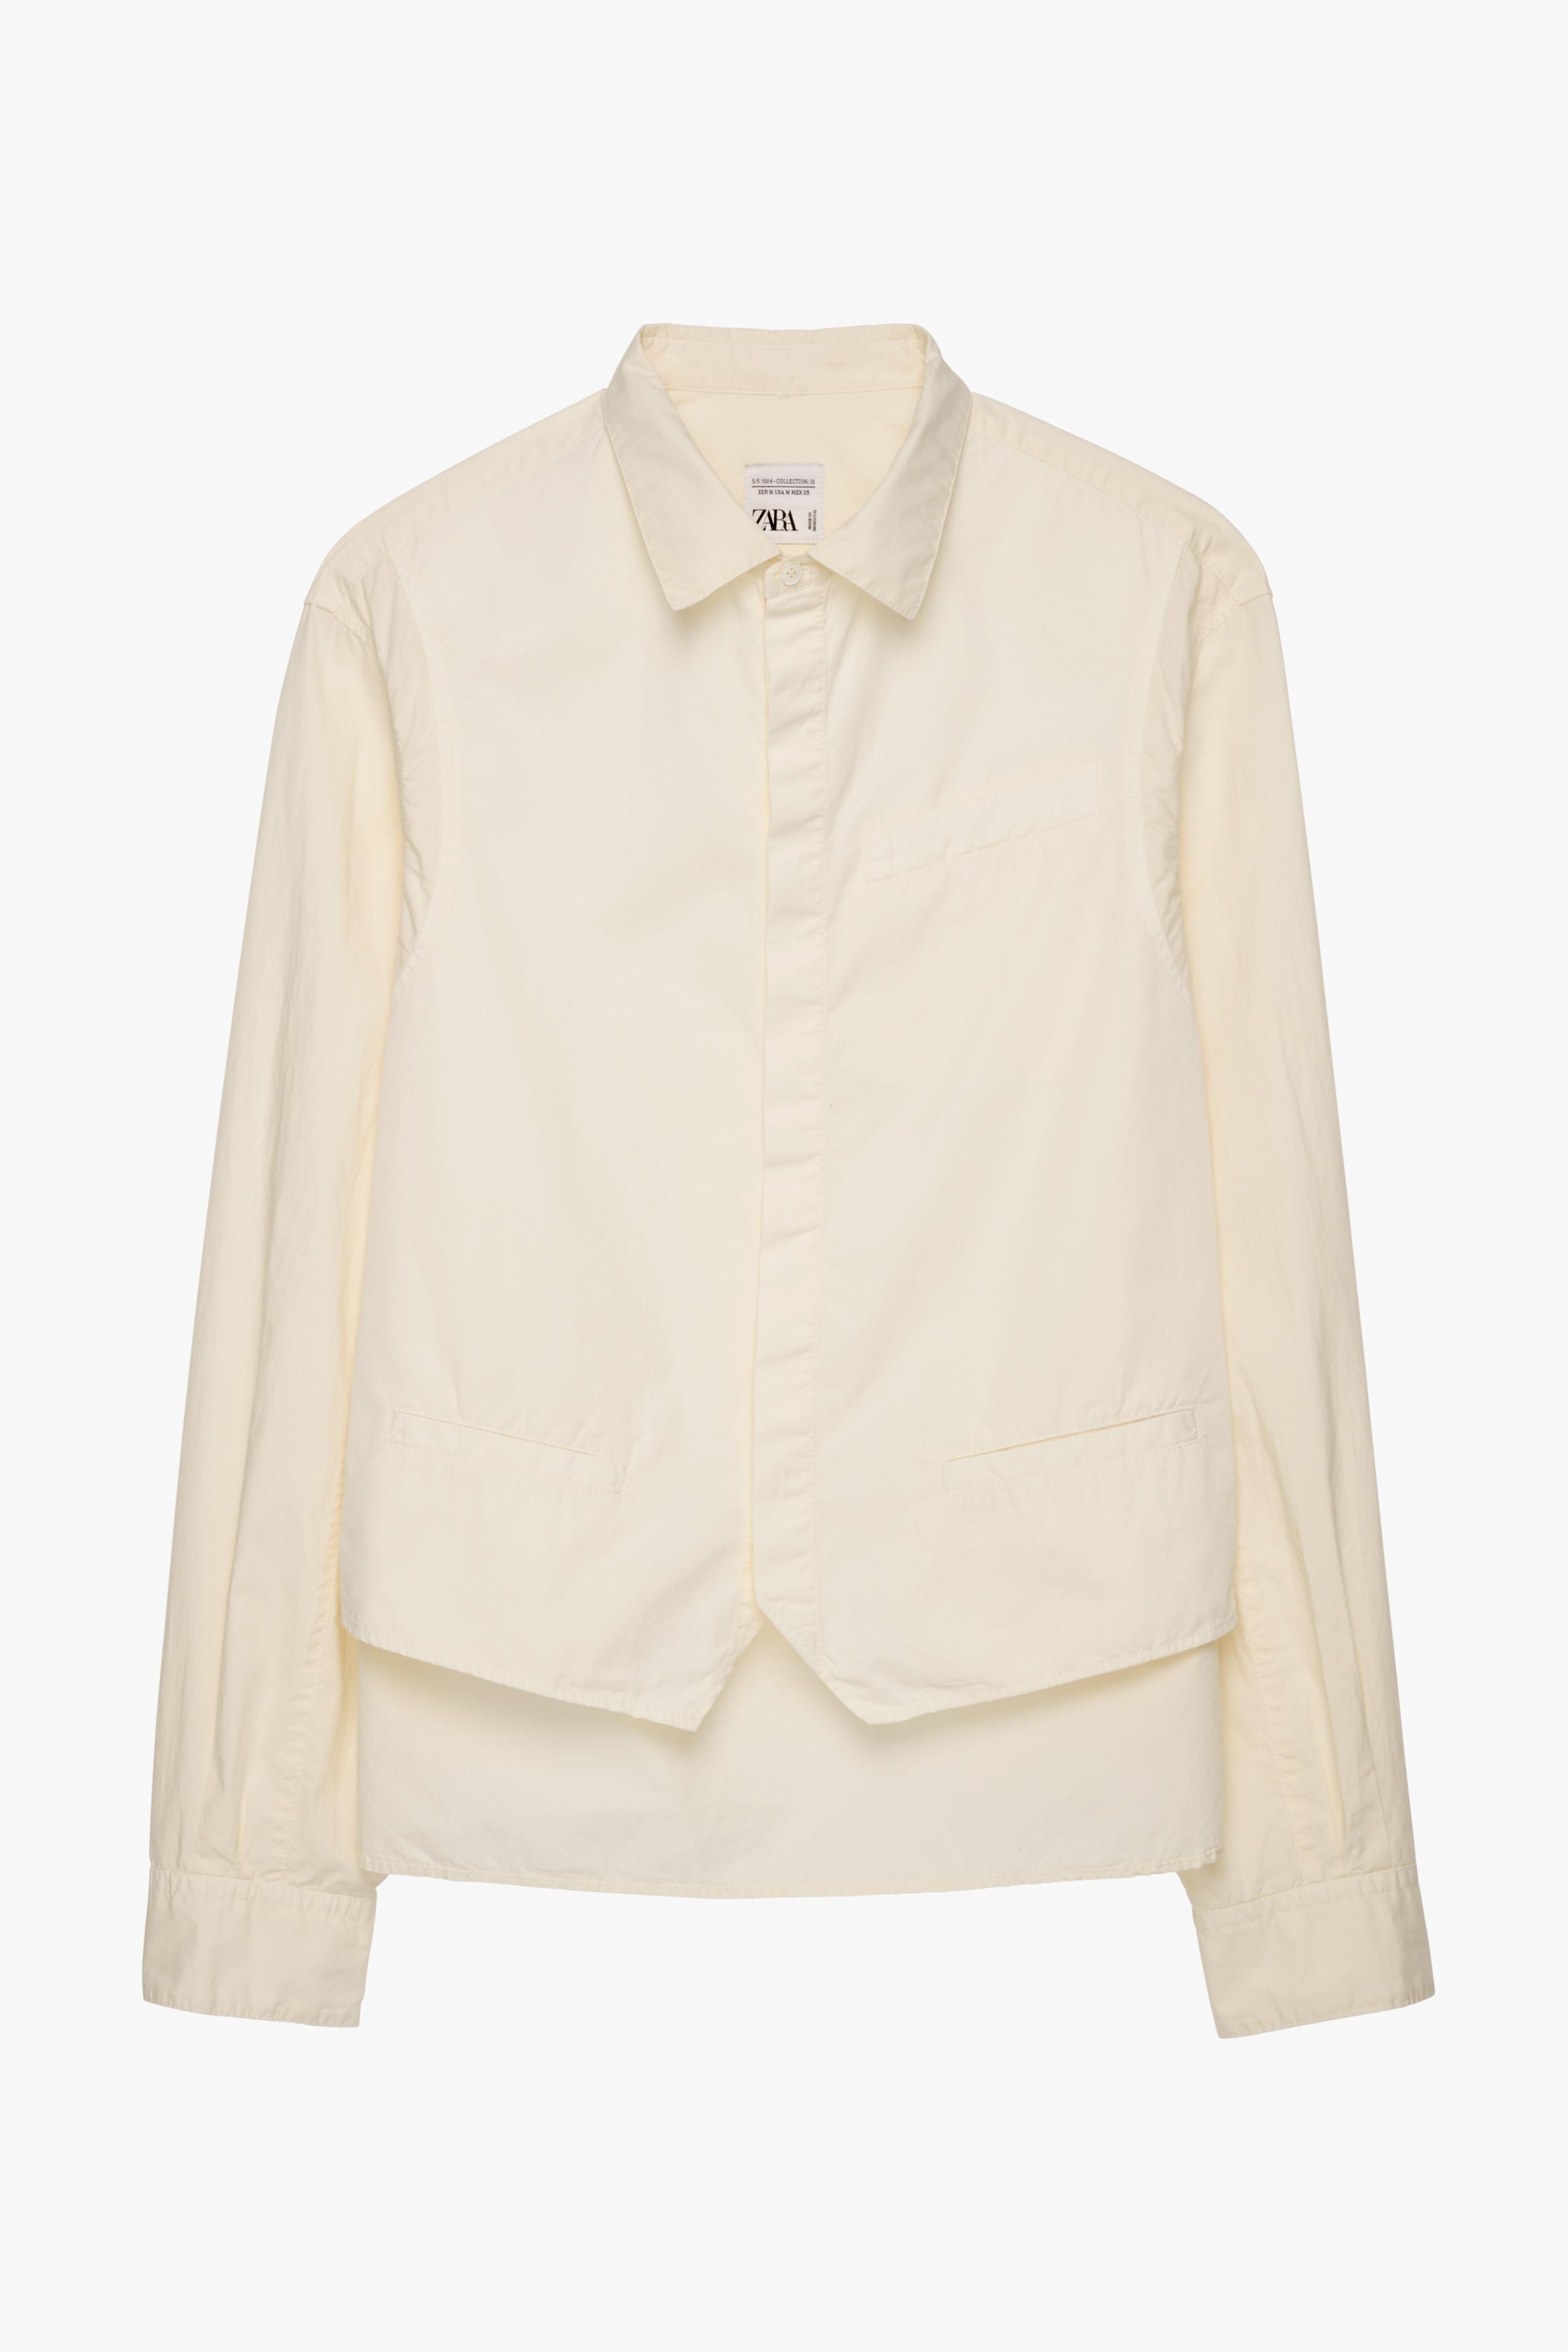 VEST STYLE SHIRT LIMITED EDITION - Oyster-white | ZARA Canada